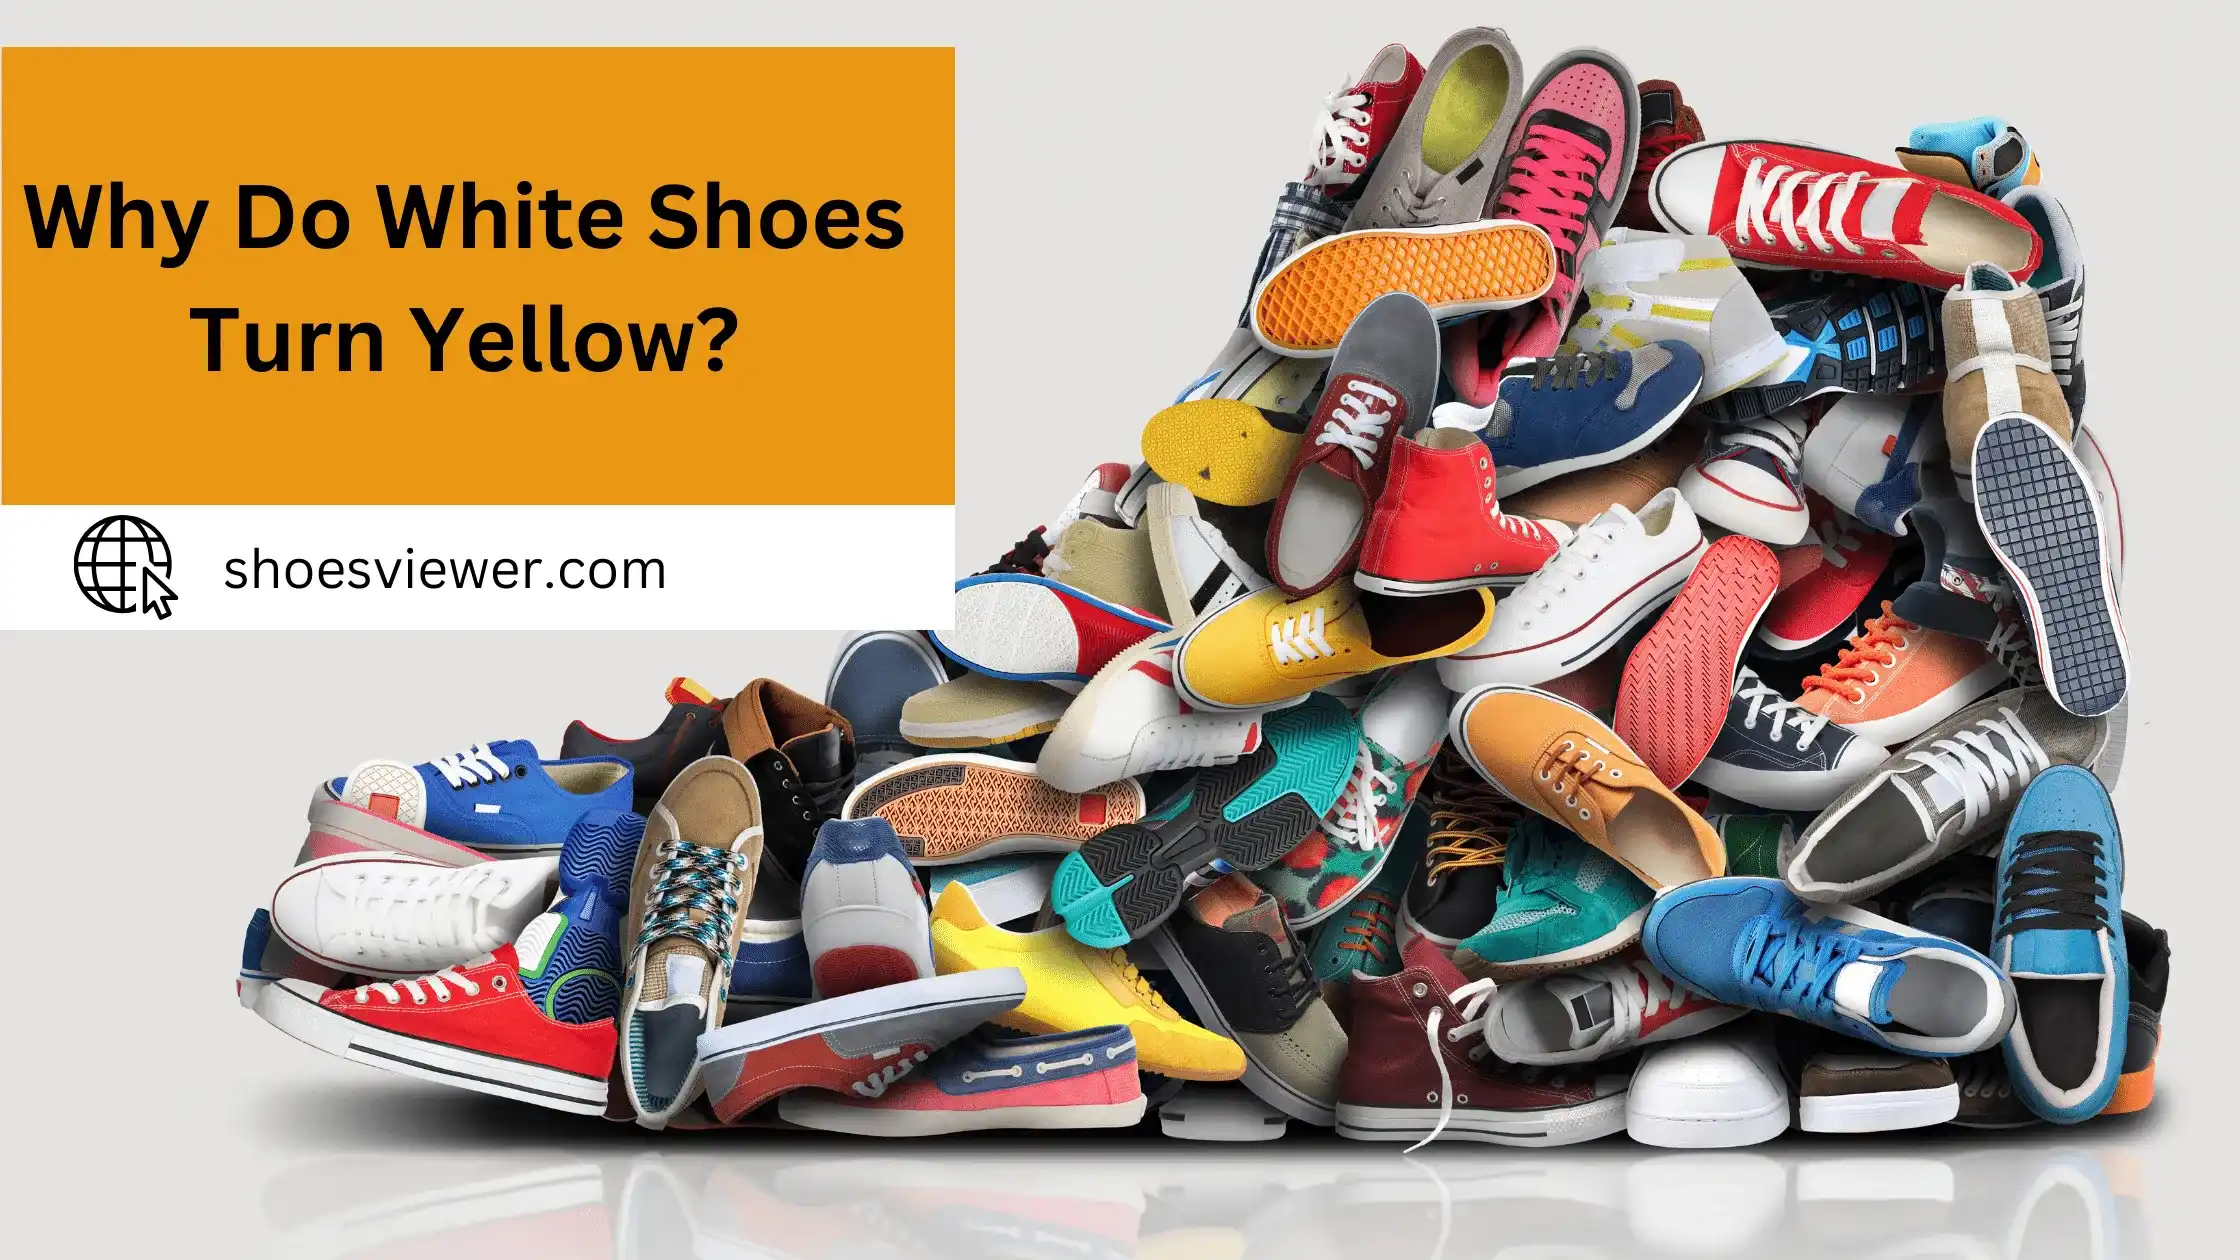 Why Do White Shoes Turn Yellow? (An In-Depth Guide)